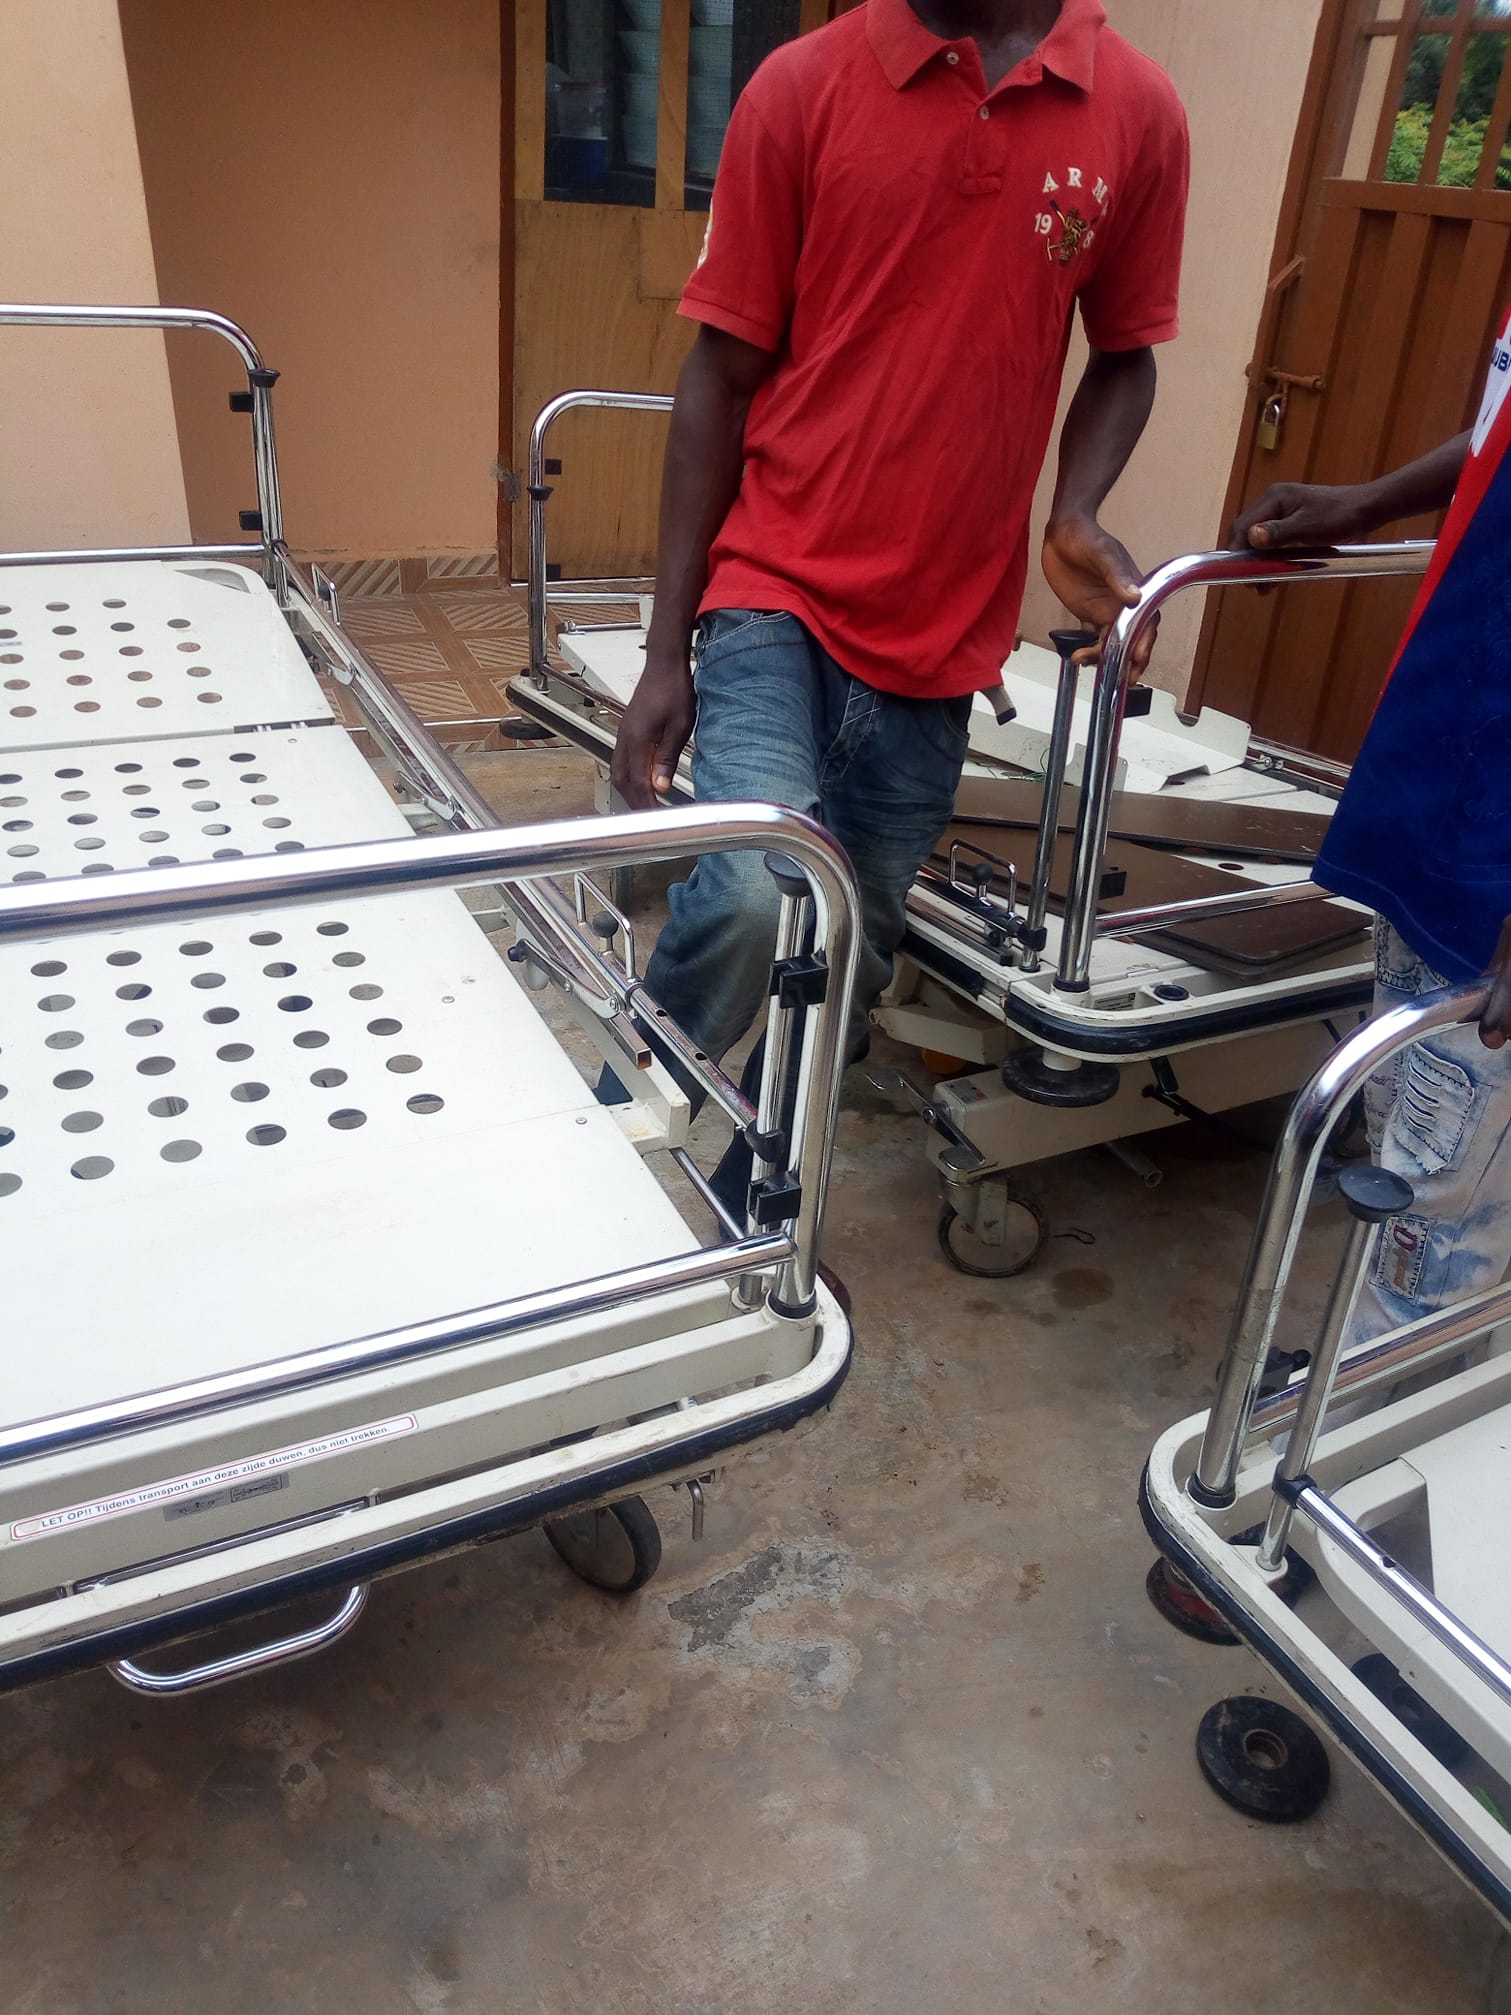 Member of parliament for Upper Denkyira East Constituency, Hon. Nana Amoako donates hospital beds to two health facilities at Meretweso and Achiase